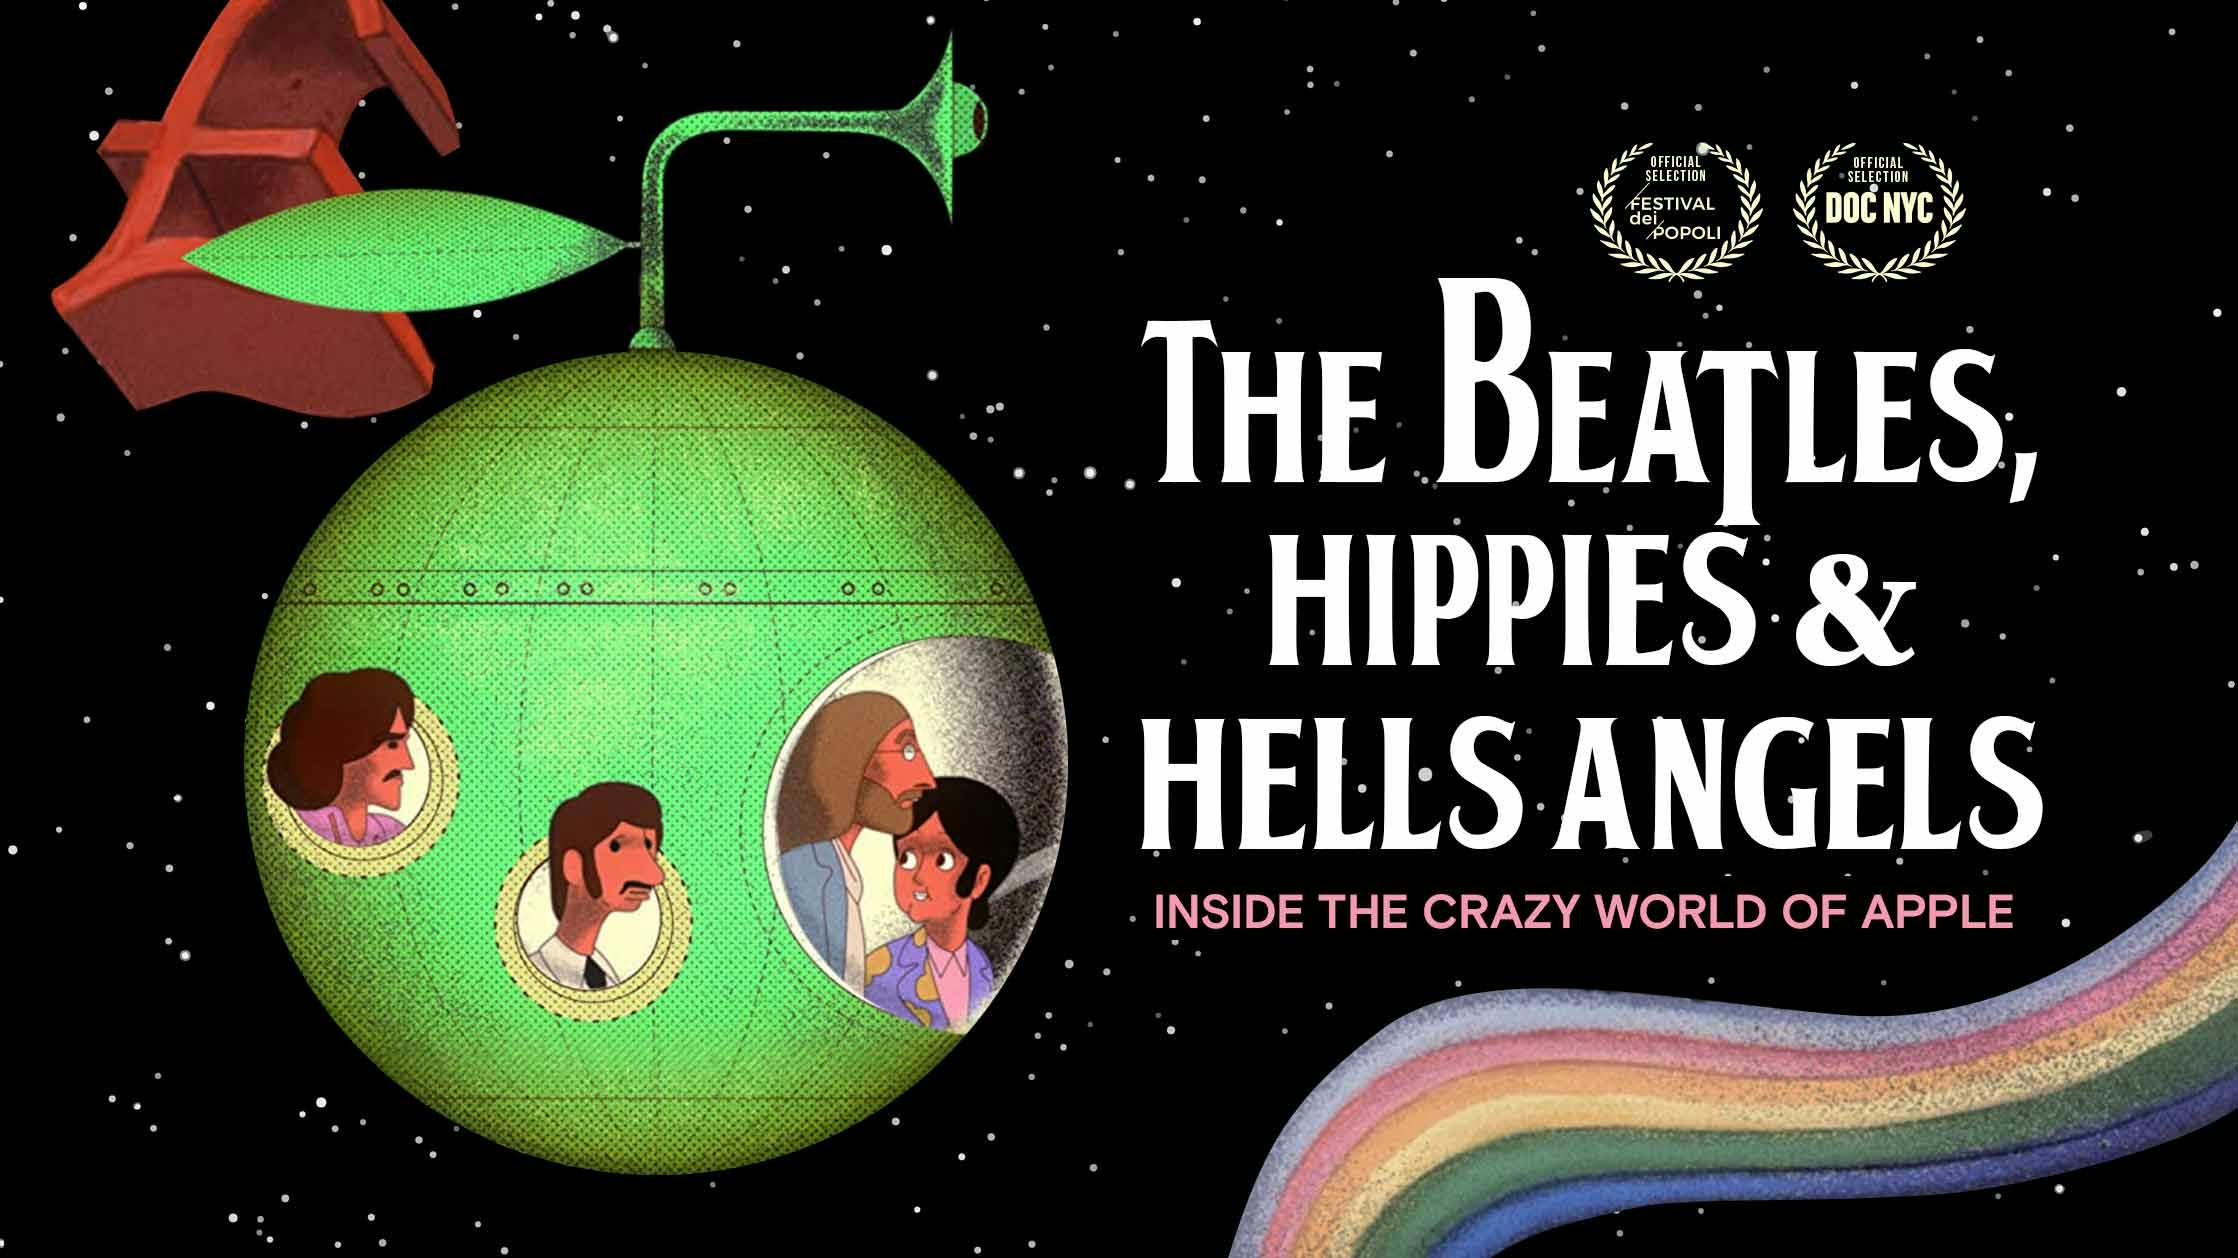 The Beatles, Hippies and Hells Angels: Inside The Crazy World Of Apple